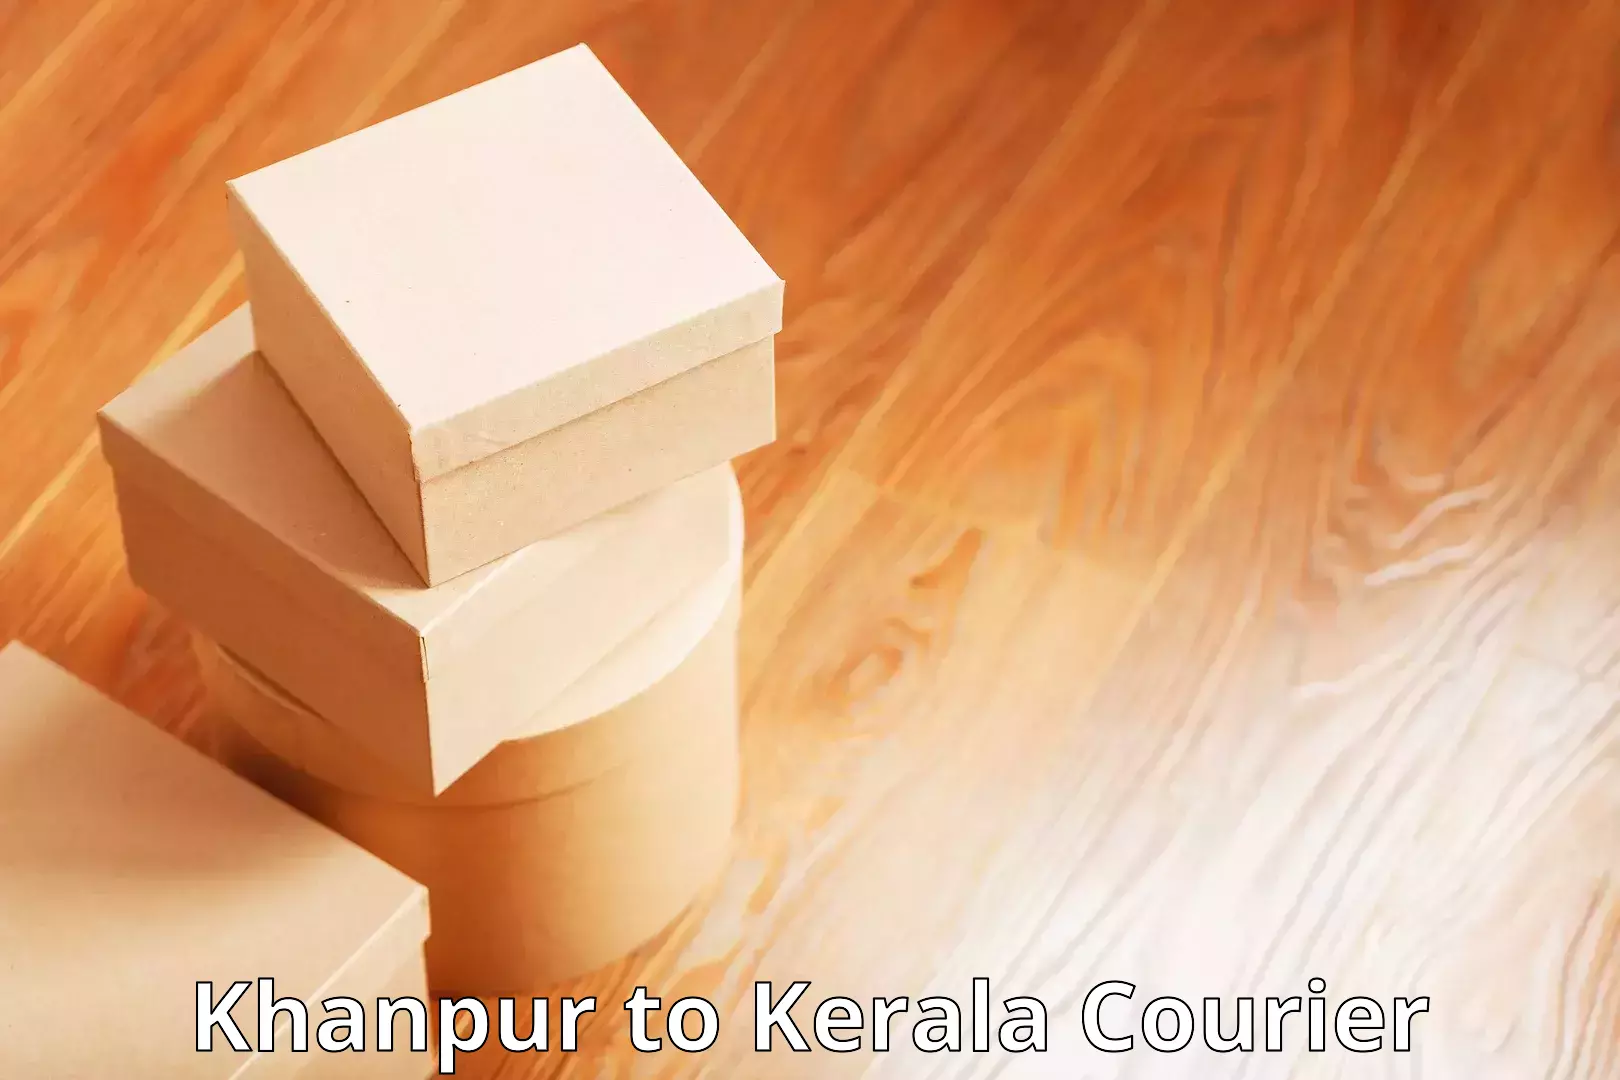 Modern courier technology in Khanpur to Kochi